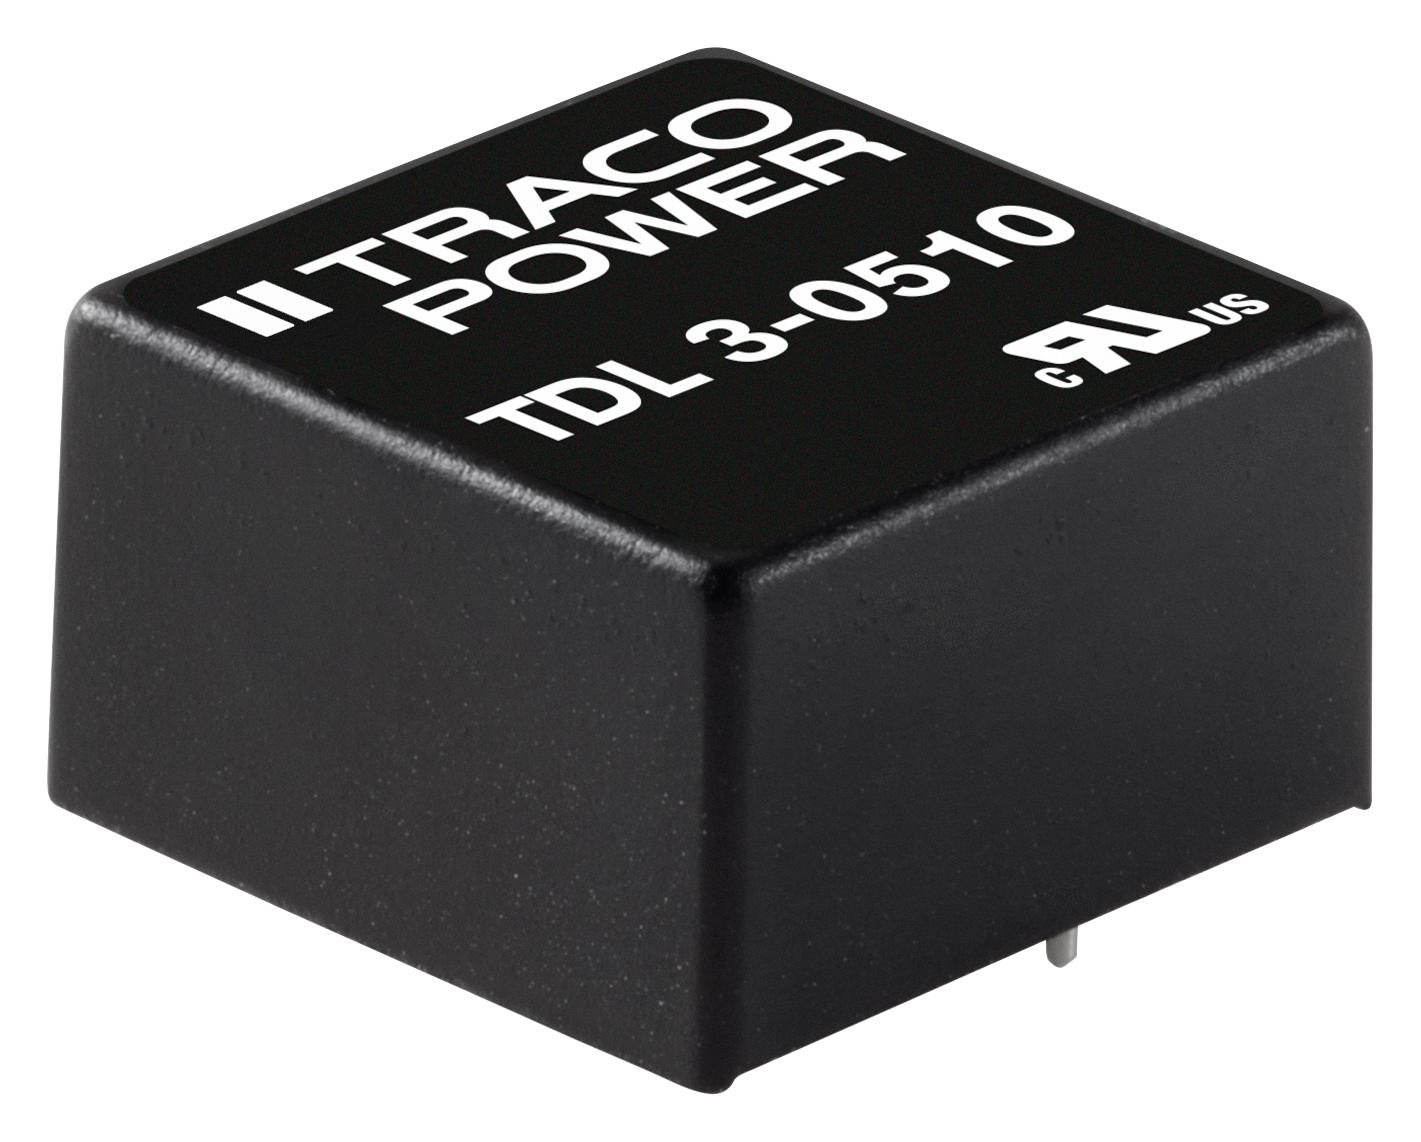 TDL 3-0521 DC-DC CONVERTER, 2 O/P, 3W TRACO POWER